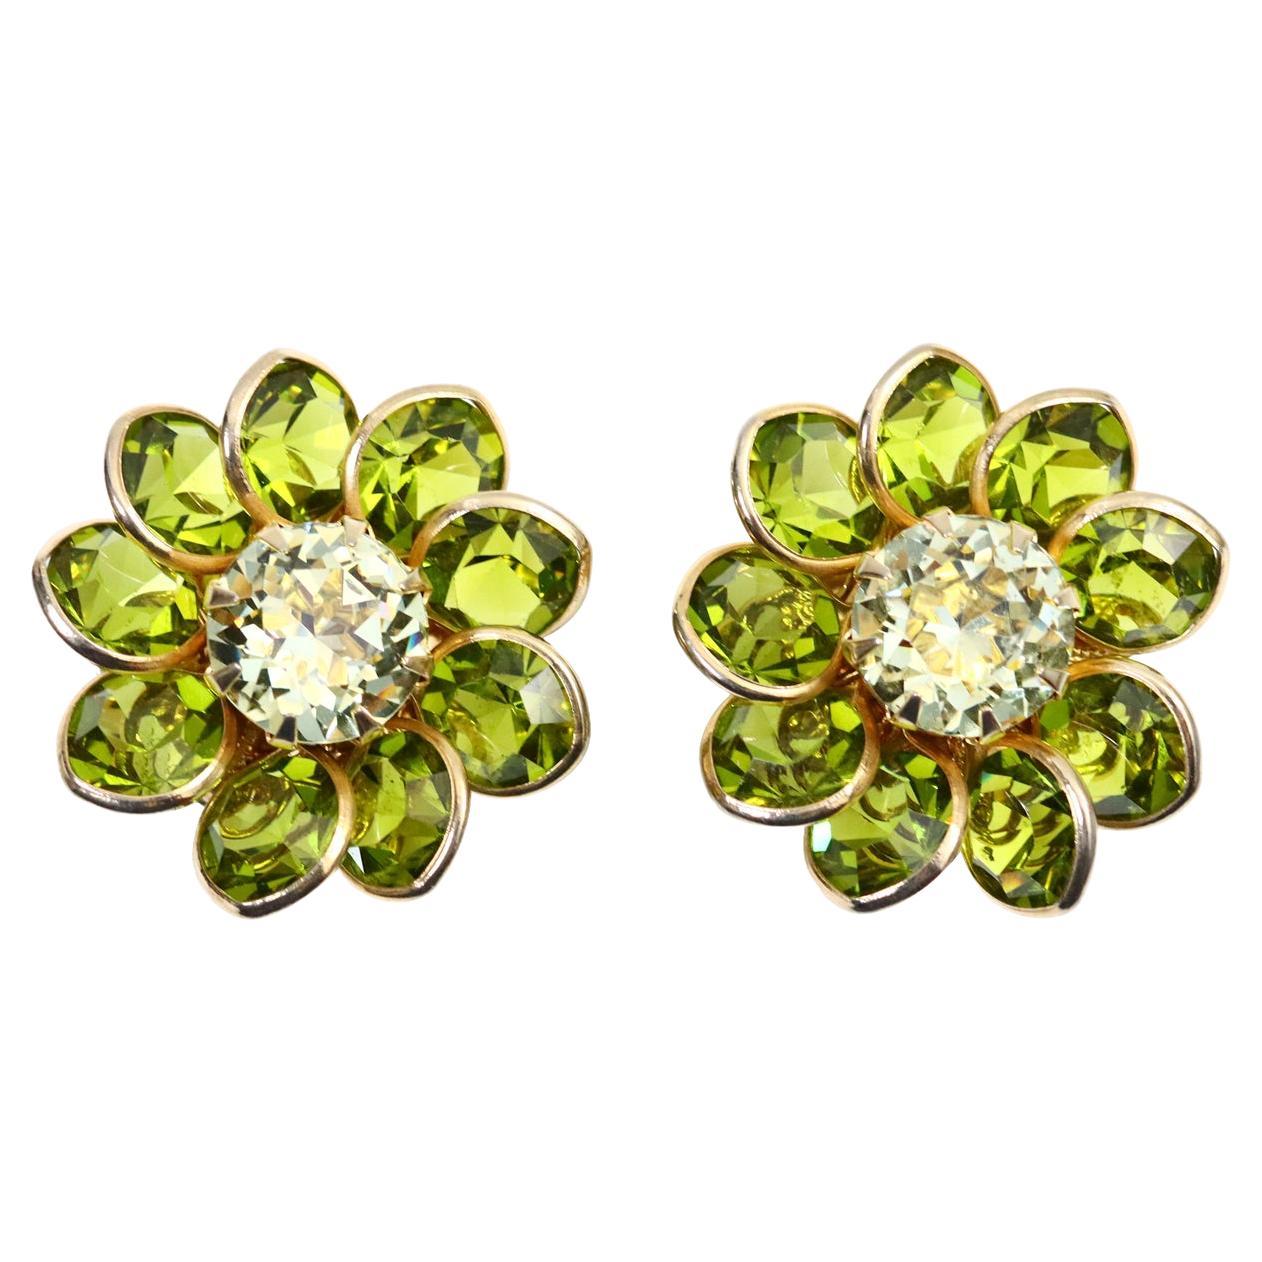 Vintage Poured Glass Gold Tone Green With Diamante Flower Earrings Circa 1960s For Sale